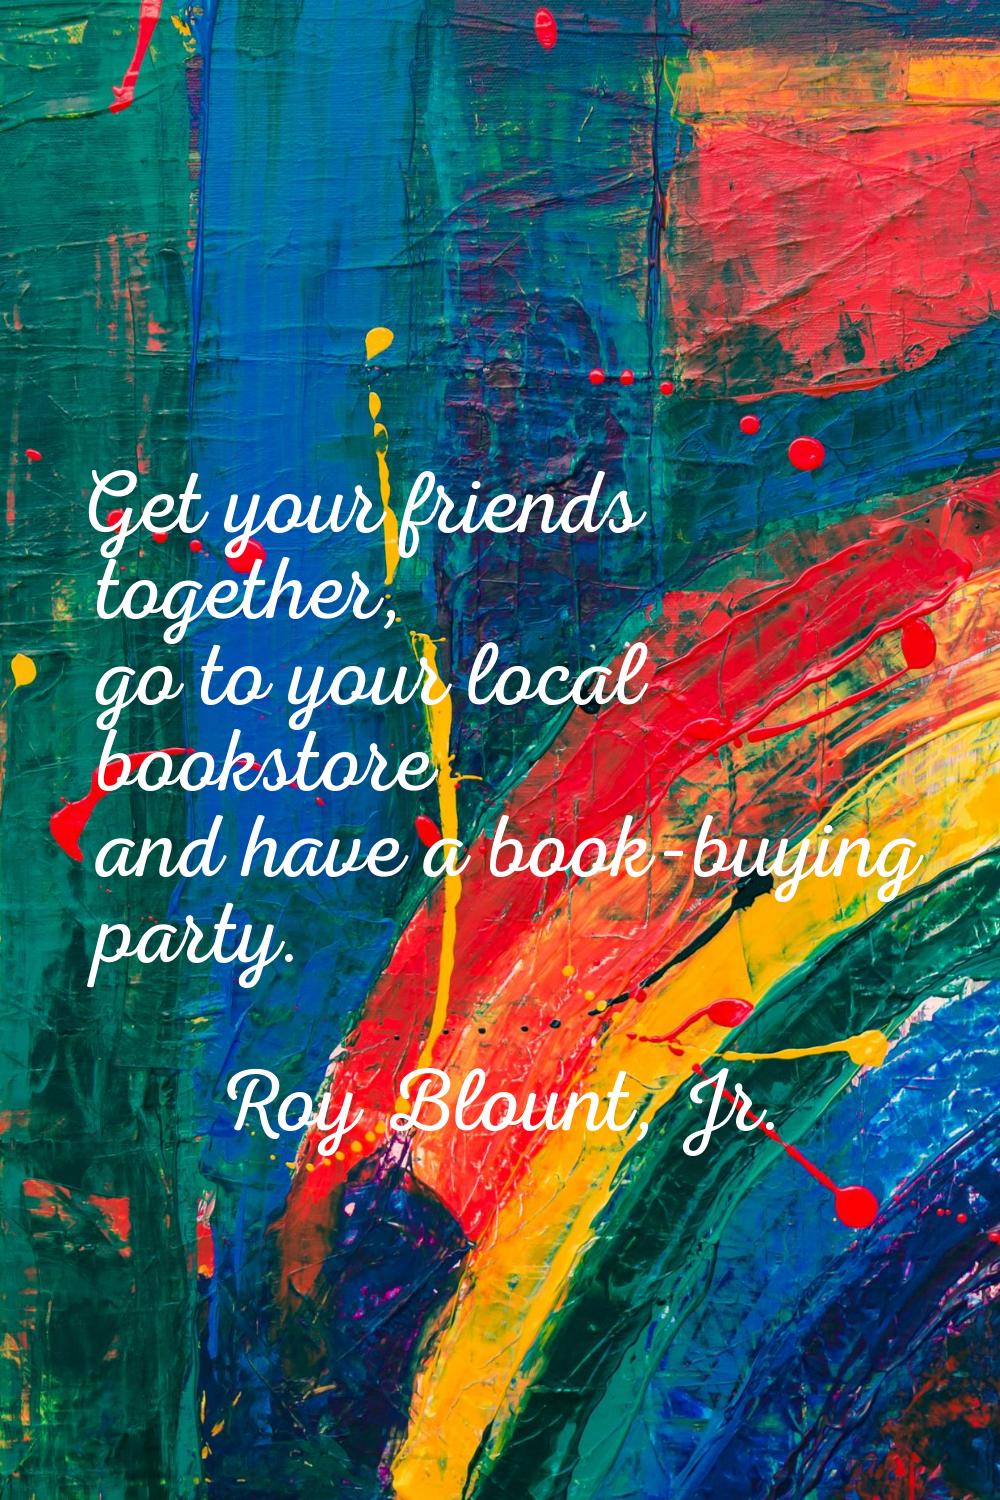 Get your friends together, go to your local bookstore and have a book-buying party.